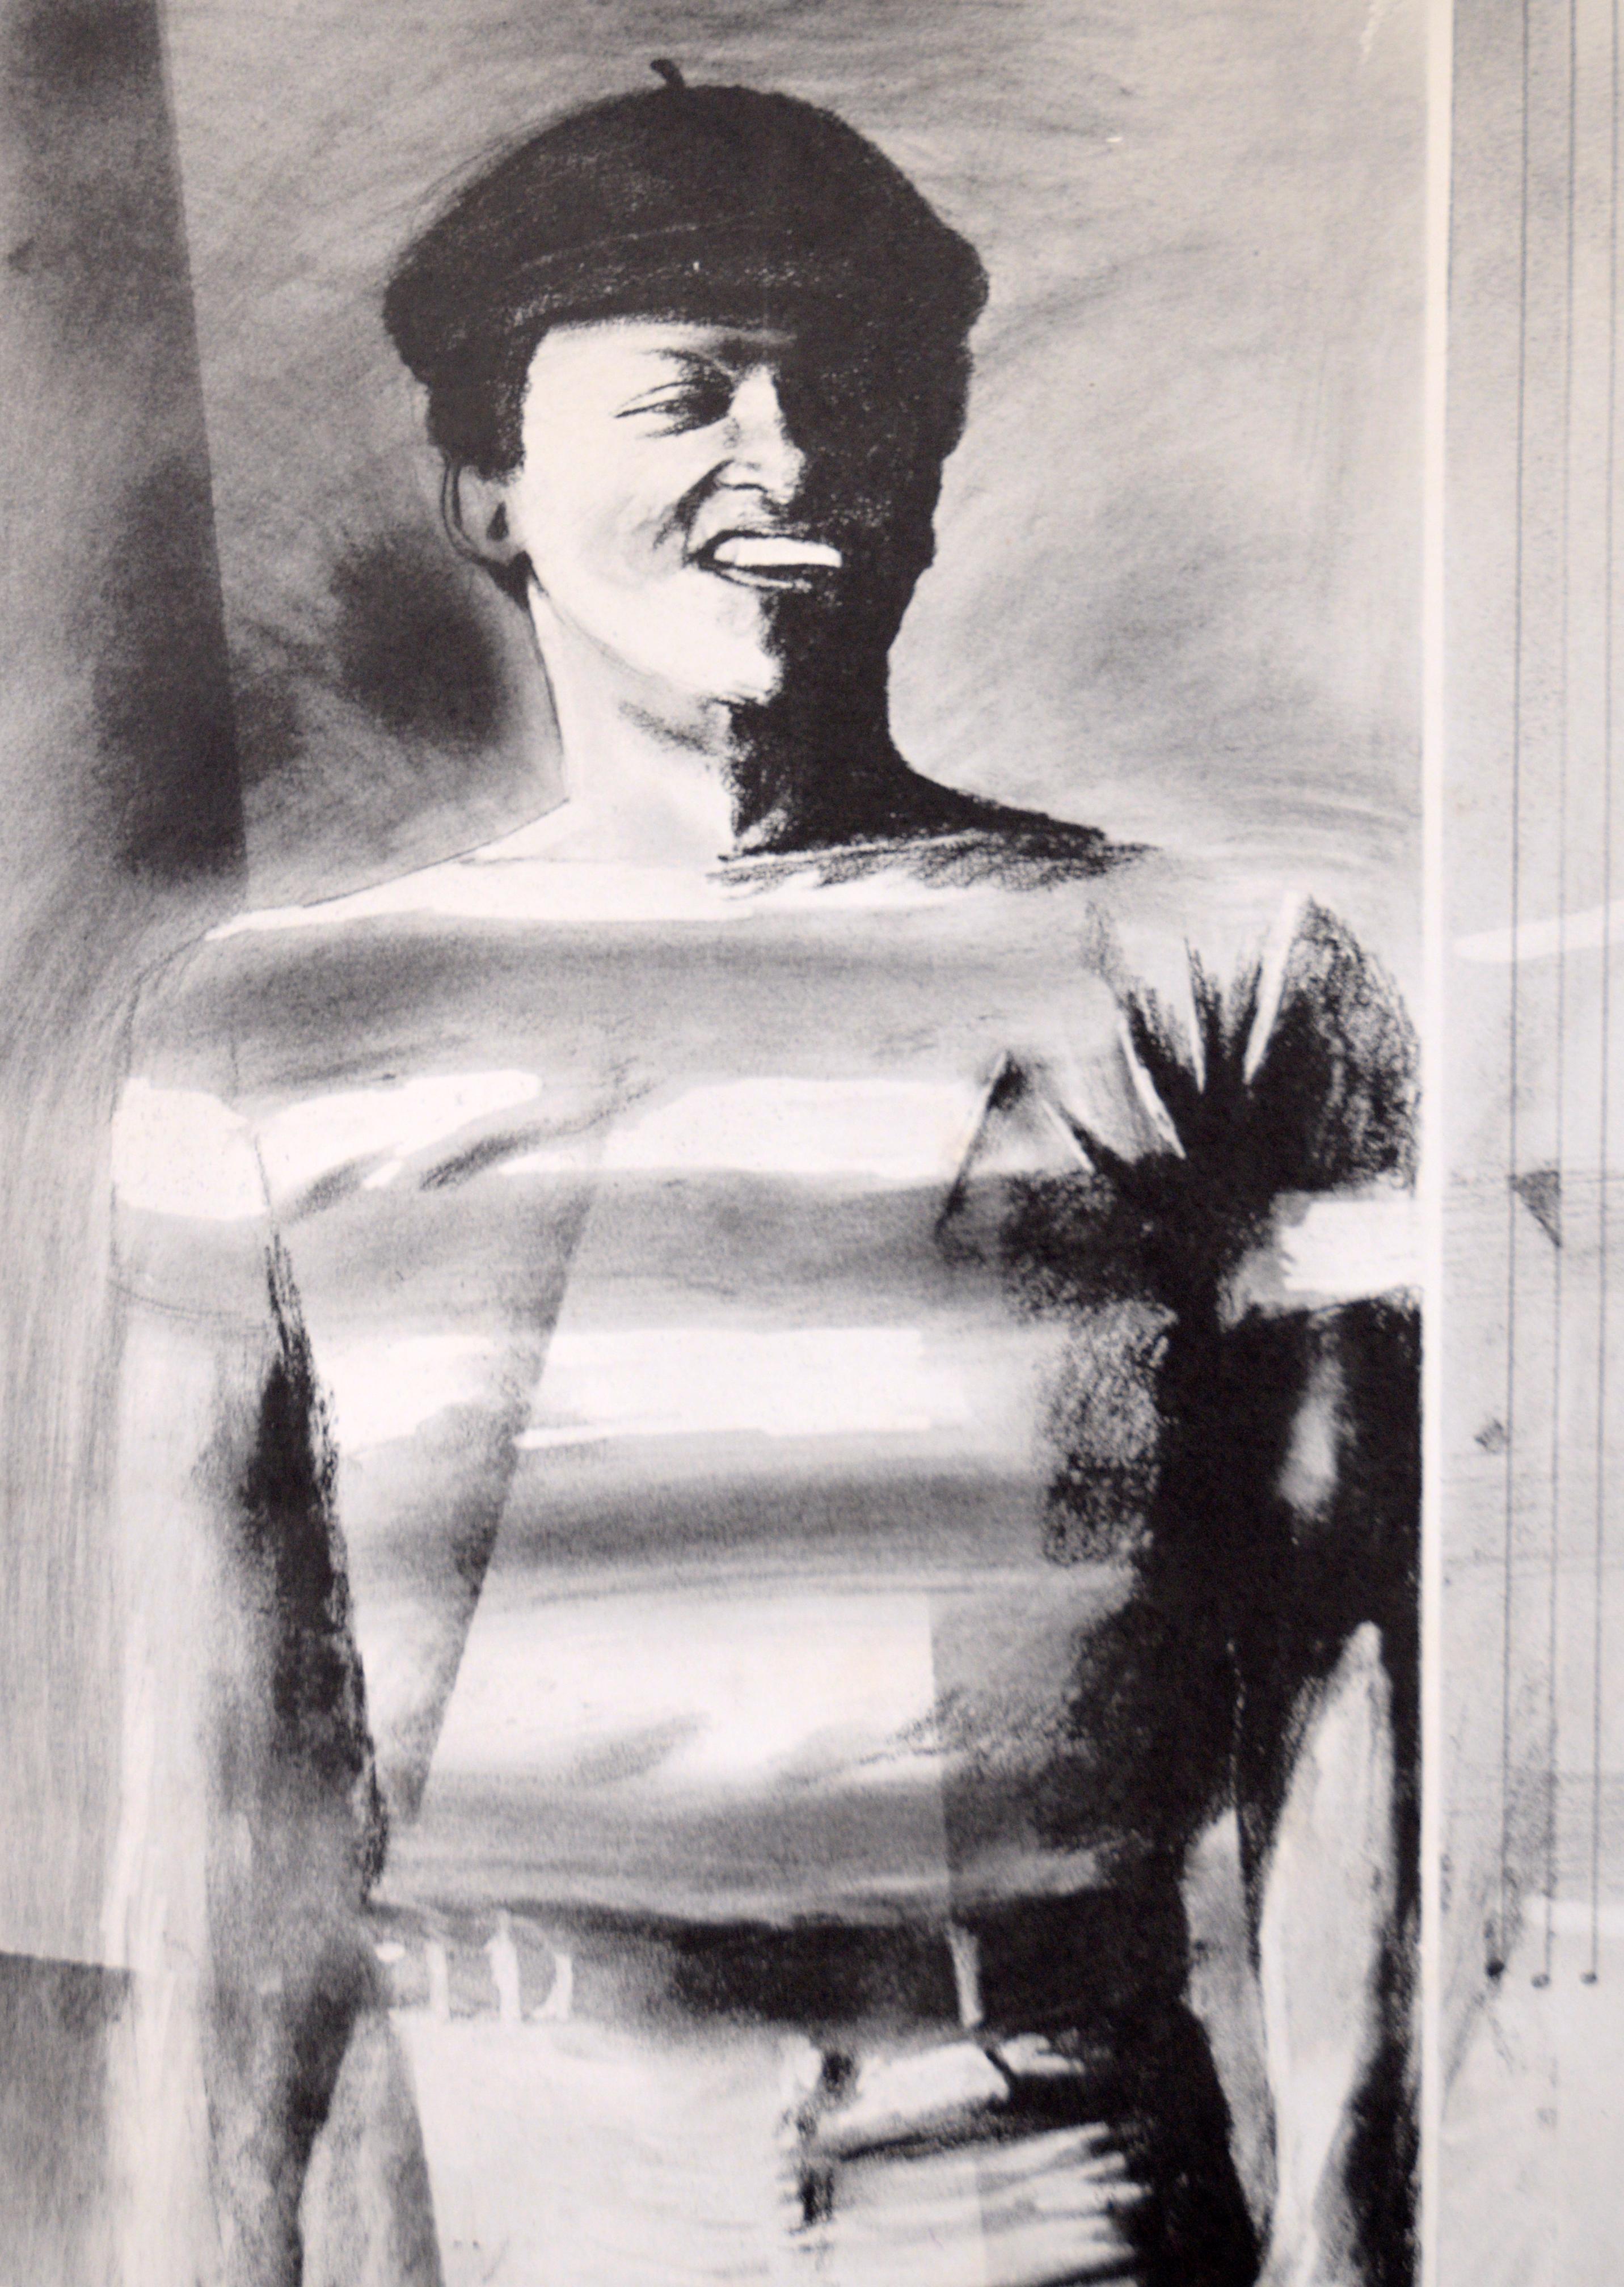 Hugh Masekela, The Father of South African Jazz - Signed Lithograph Ink on Paper - Print by Eugene Hawkins